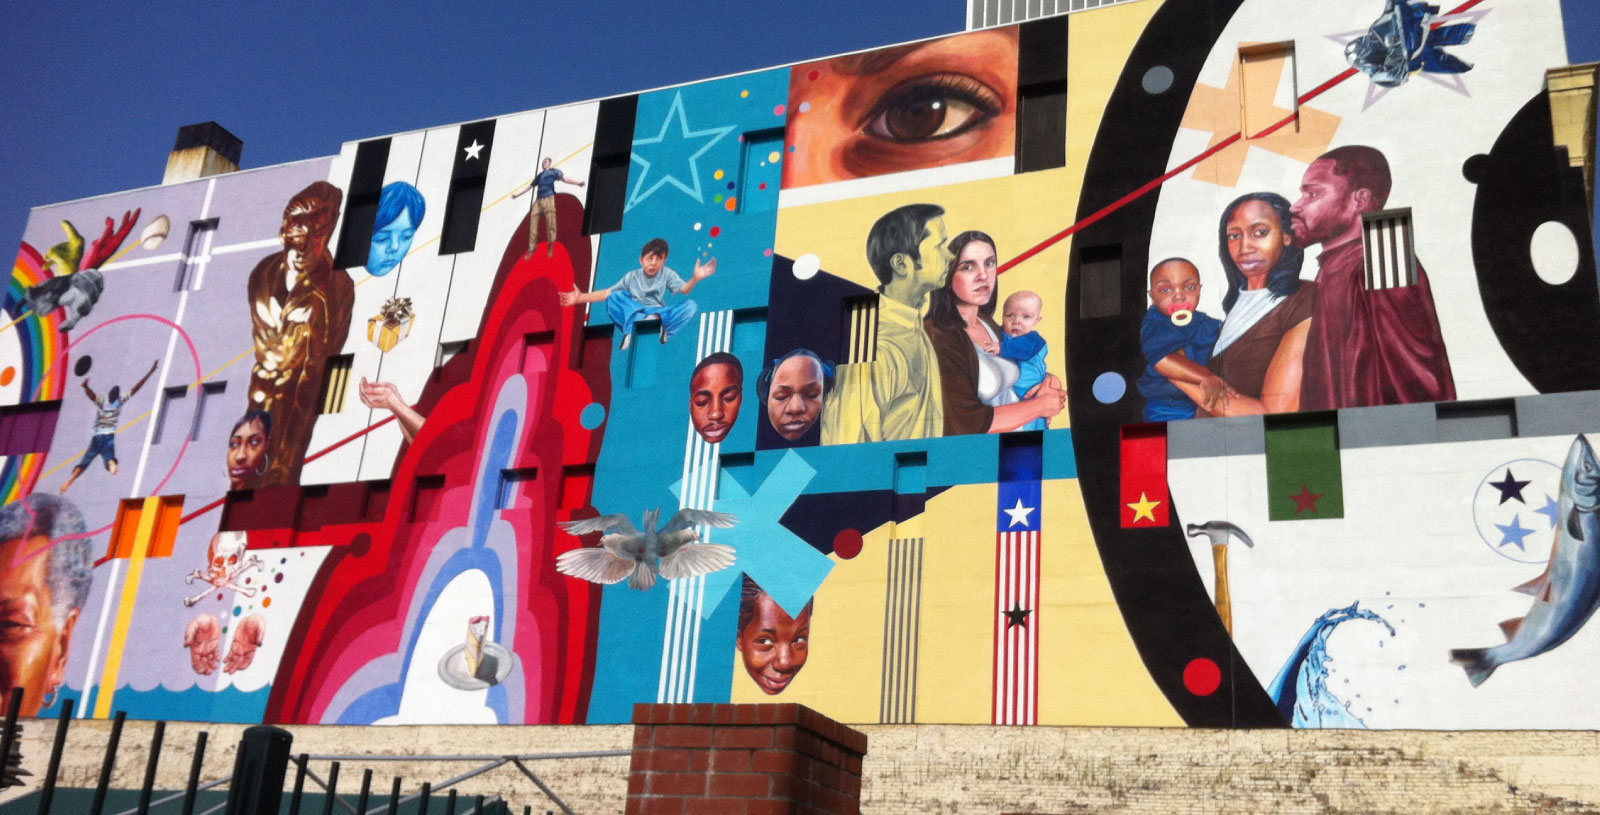 Local artists and world-renowned artist Jeff Zimmerman created the "A Note for Hope" mural on the Toof building's east wall